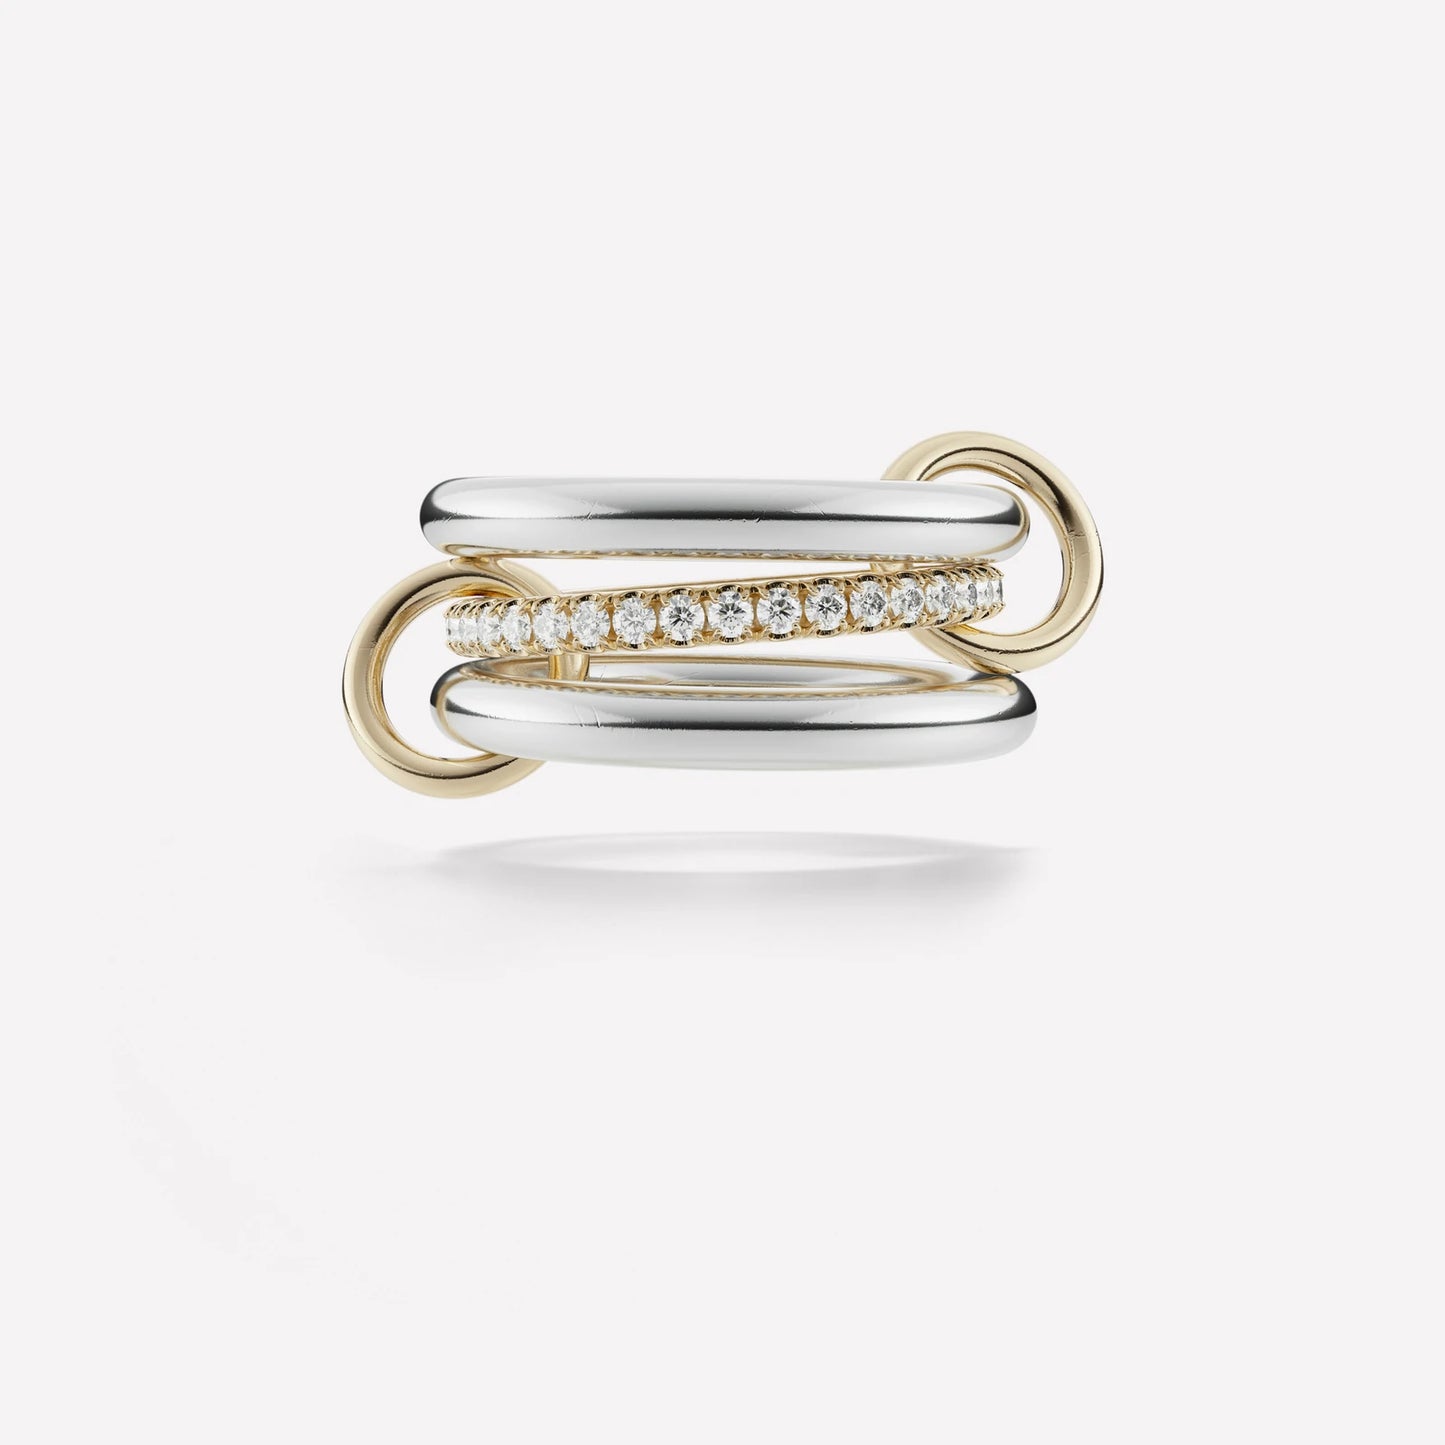 LIBRA SILVER AND GOLD PETITE RING